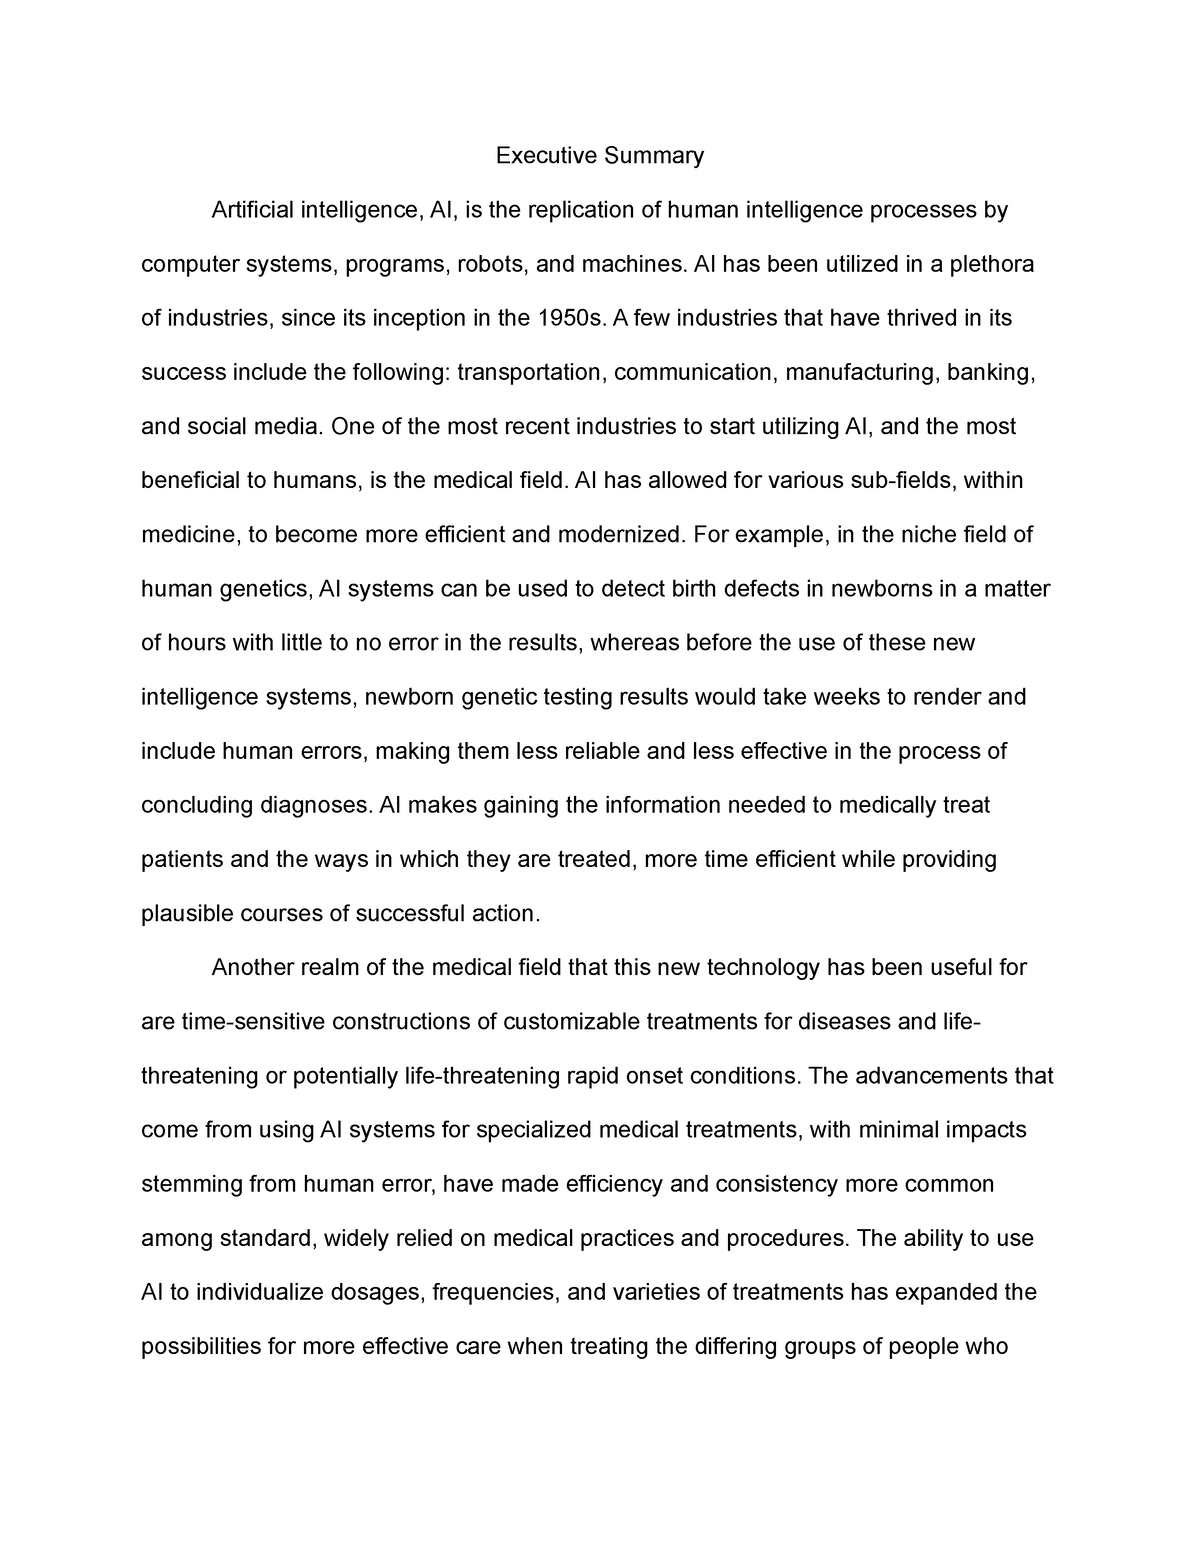 research paper summary ai